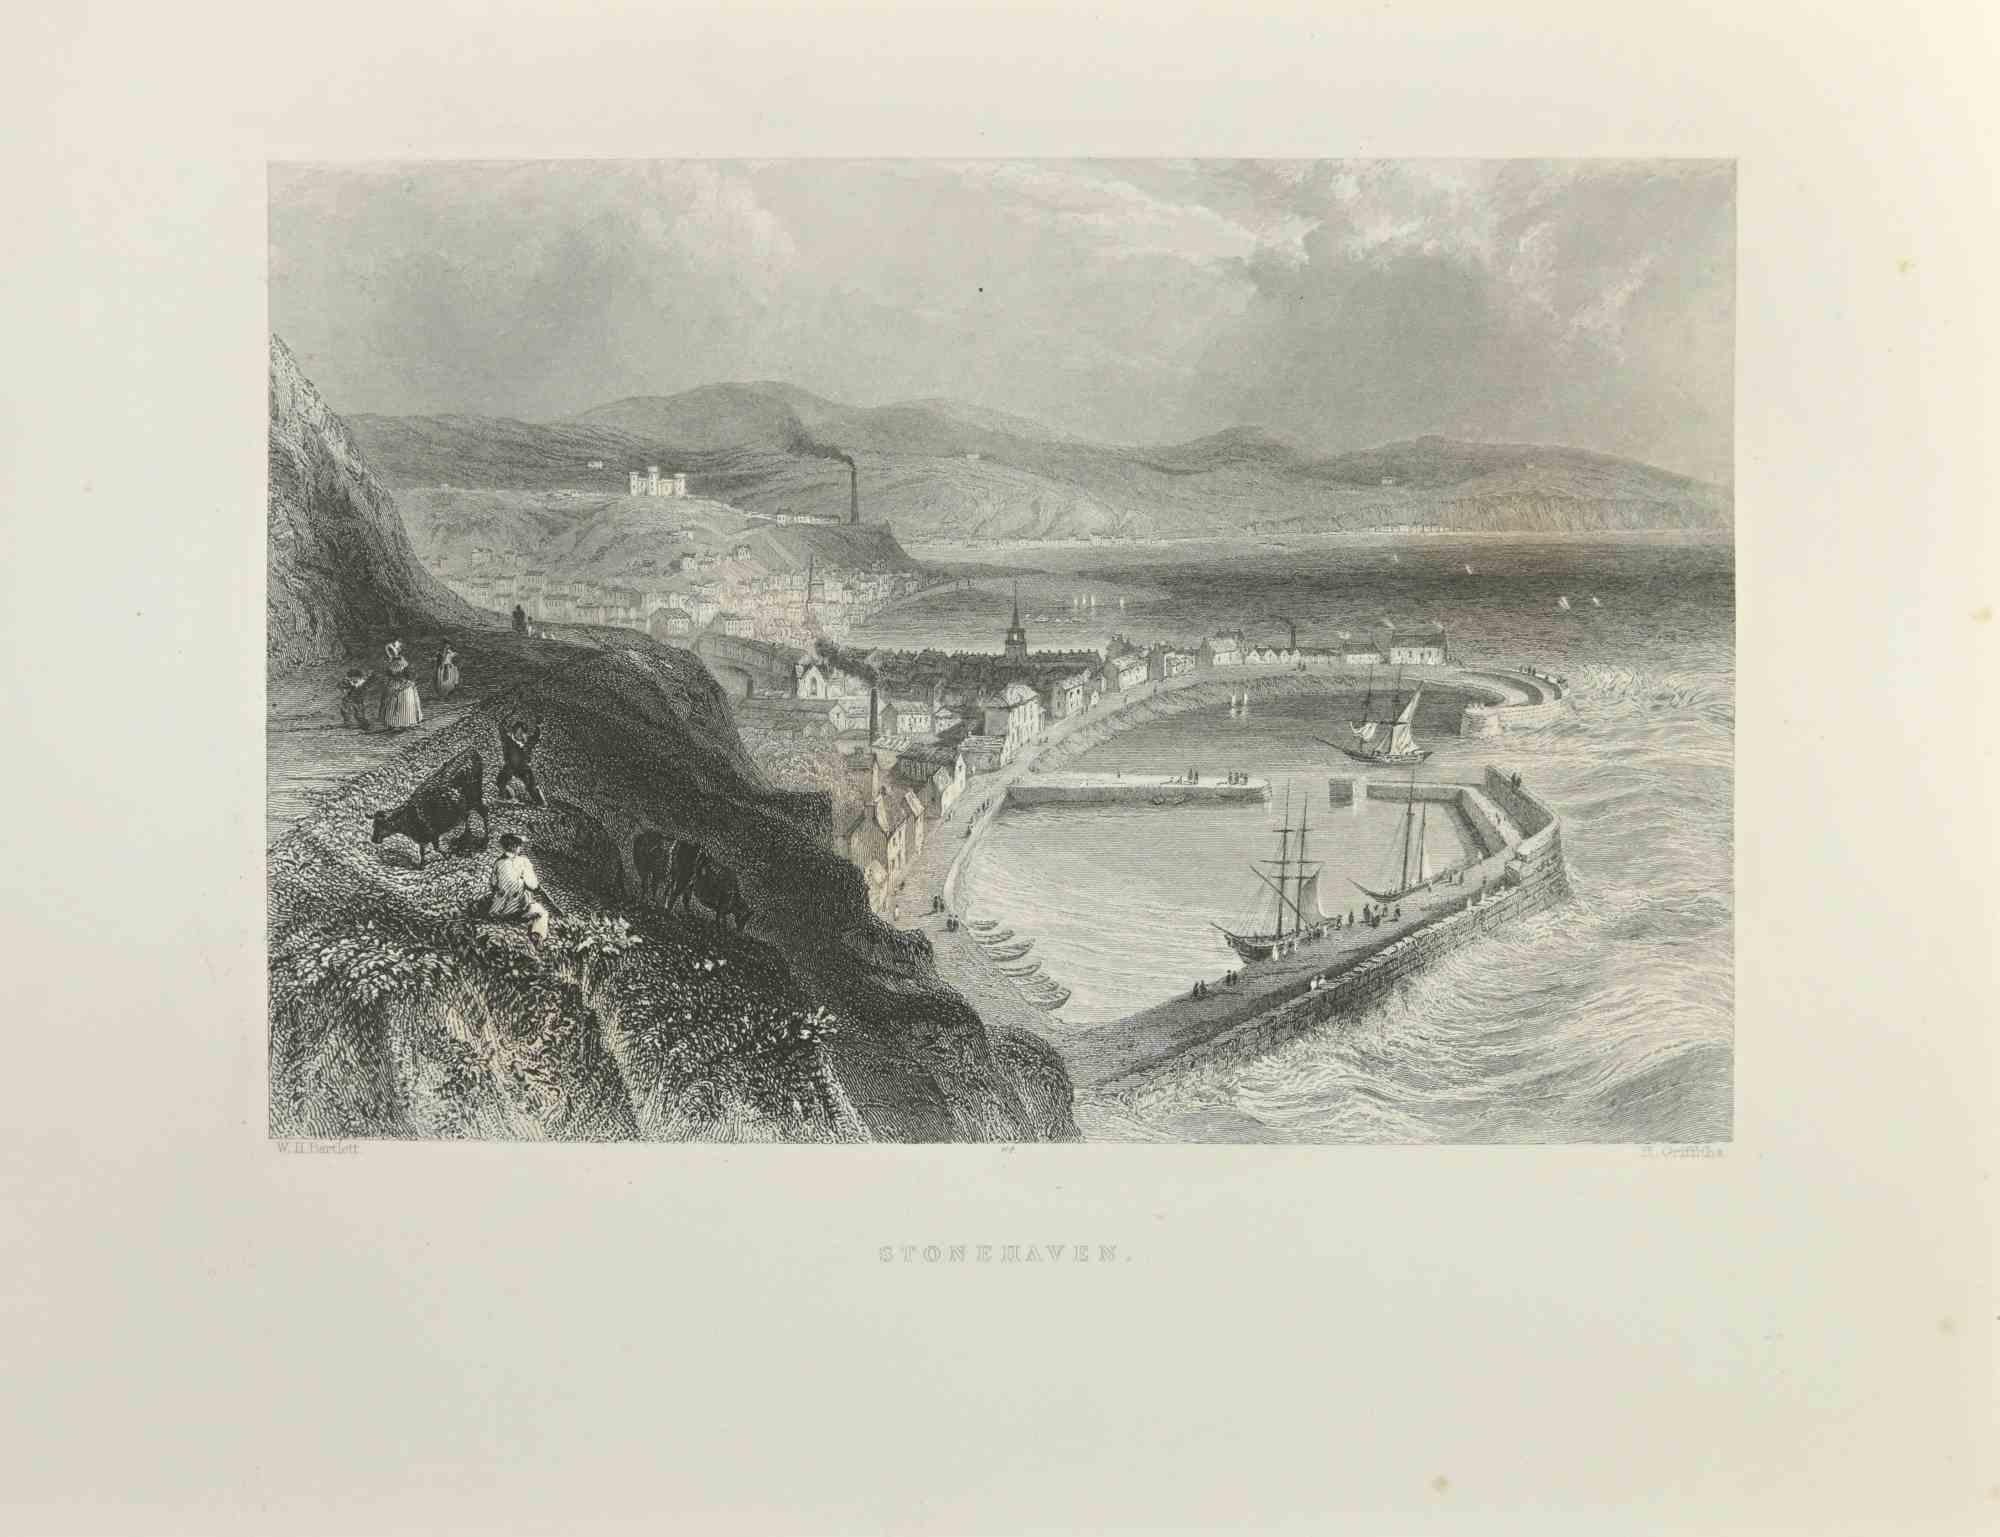 Stonehaven - Etching By W.H. Bartlett - 1845